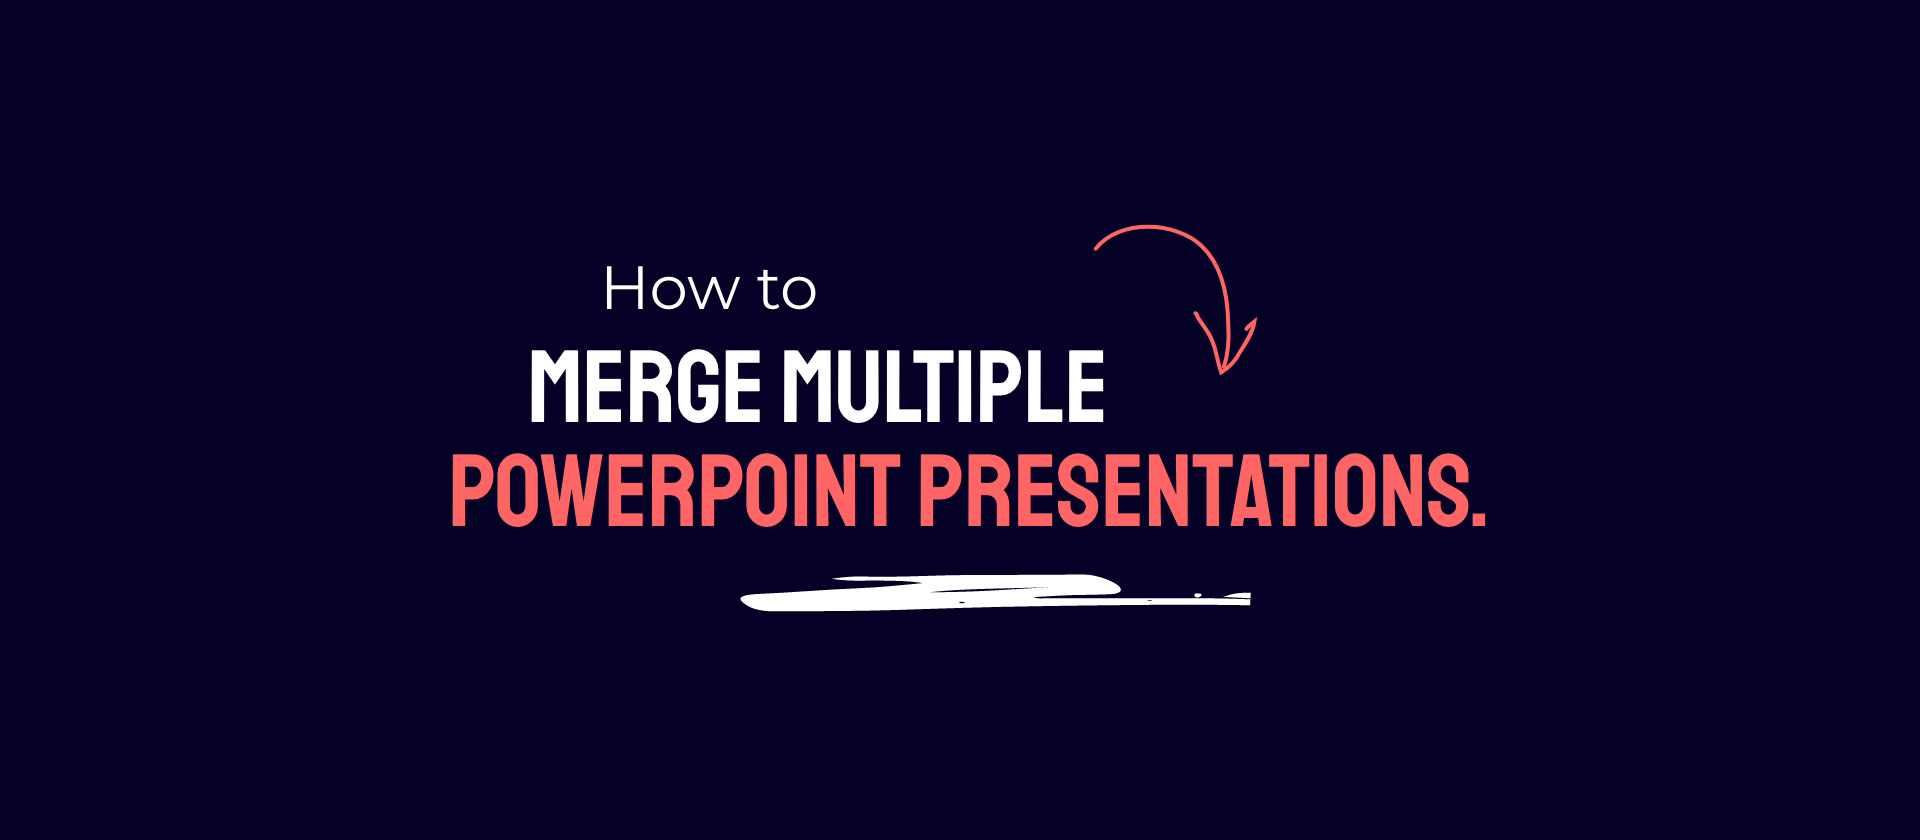 merging multiple powerpoint presentations into one